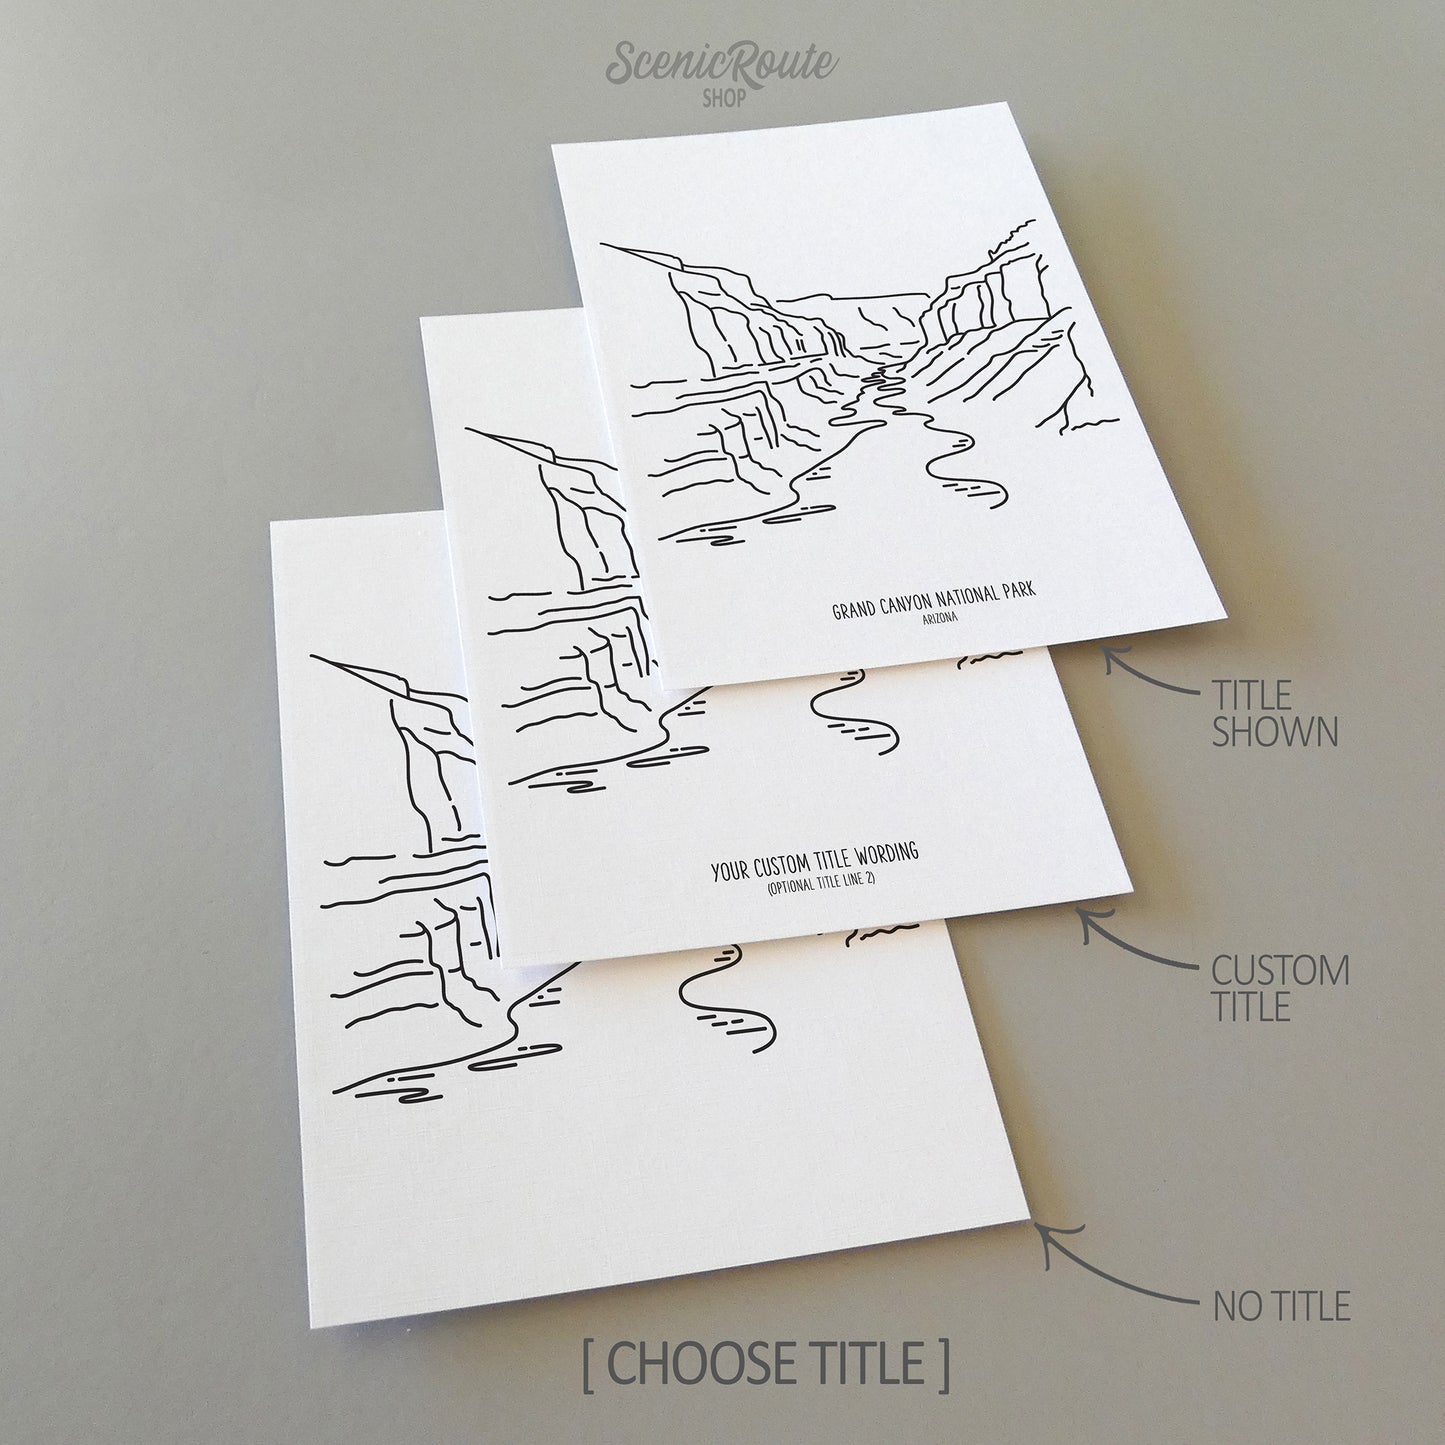 Three line art drawings of Grand Canyon National Park on white linen paper with a gray background. The pieces are shown with title options that can be chosen and personalized.